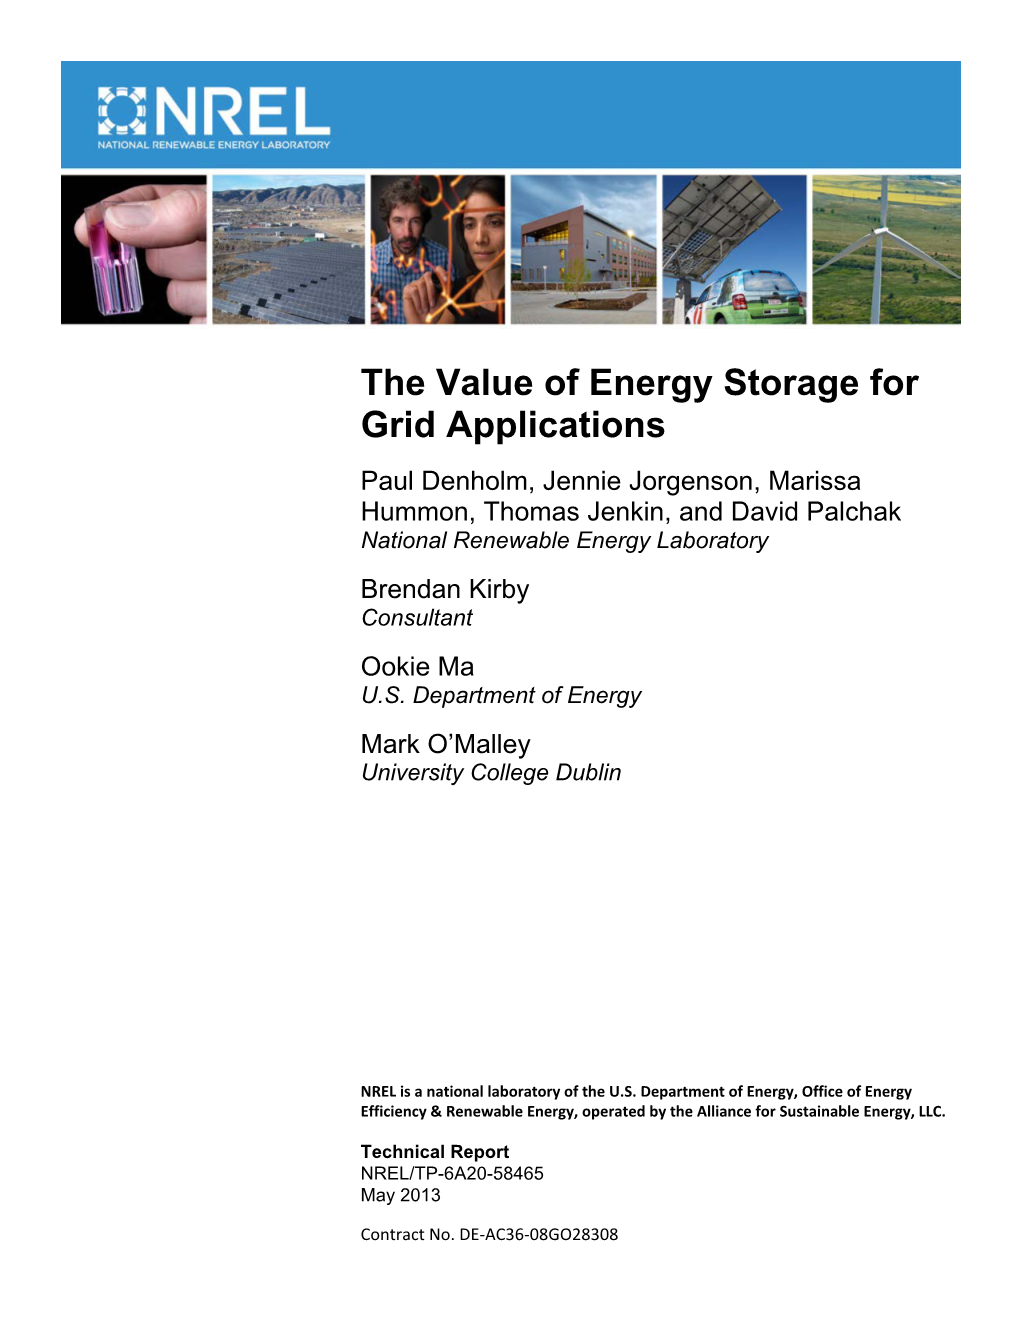 The Value of Energy Storage for Grid Applications